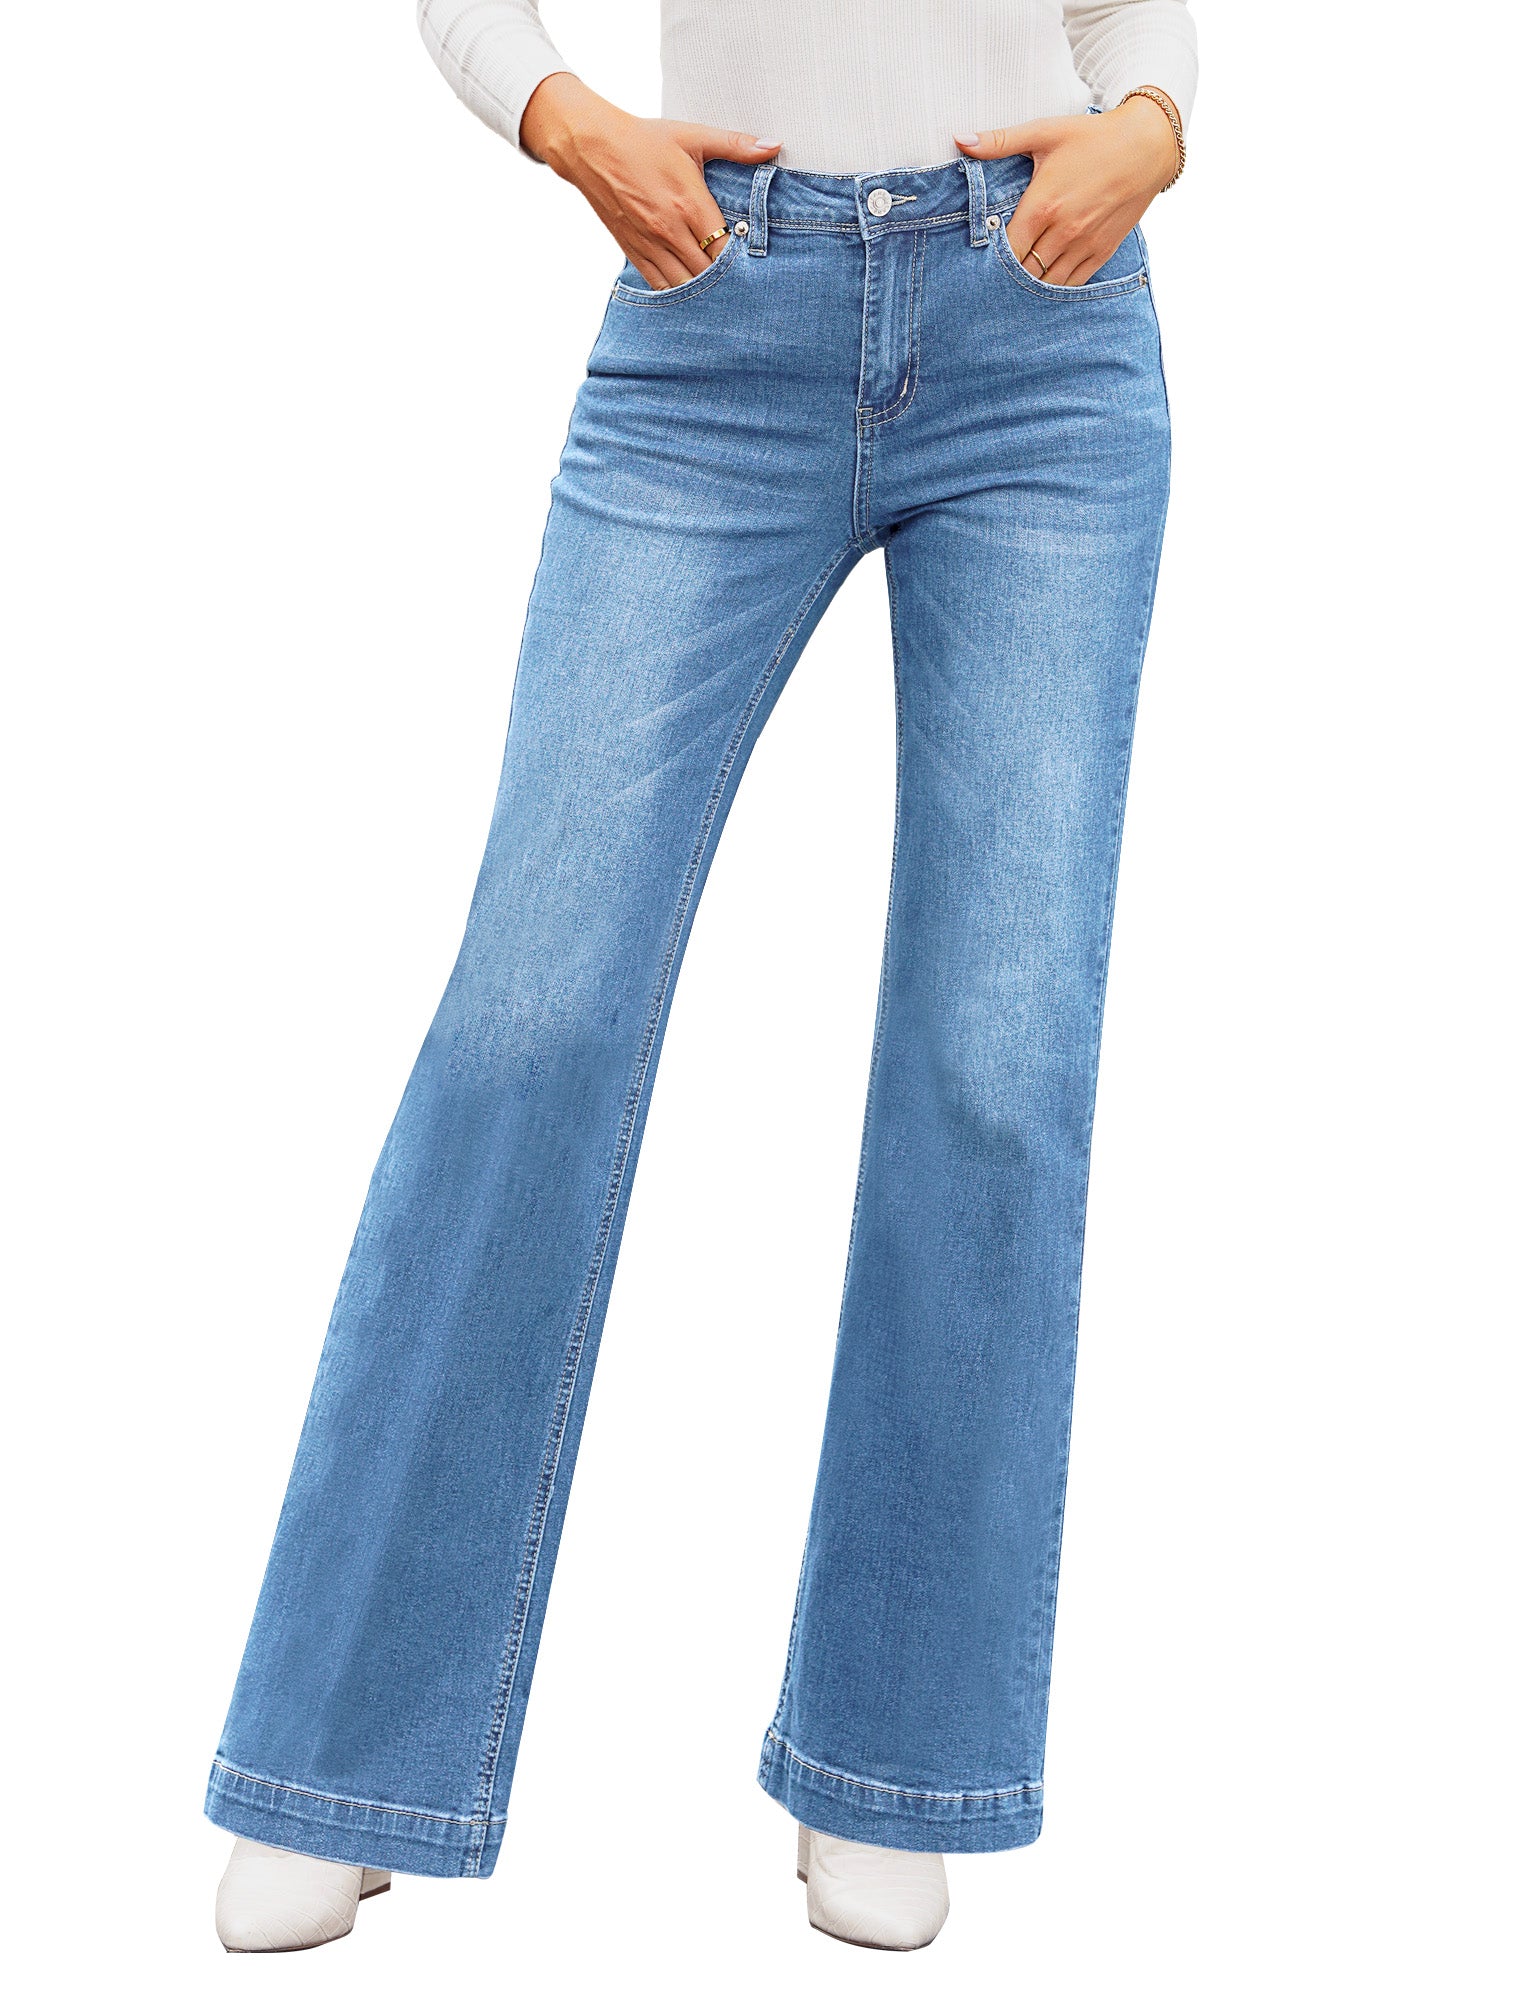 Xs Womens Jeans - Buy Xs Womens Jeans Online at Best Prices In India |  Flipkart.com